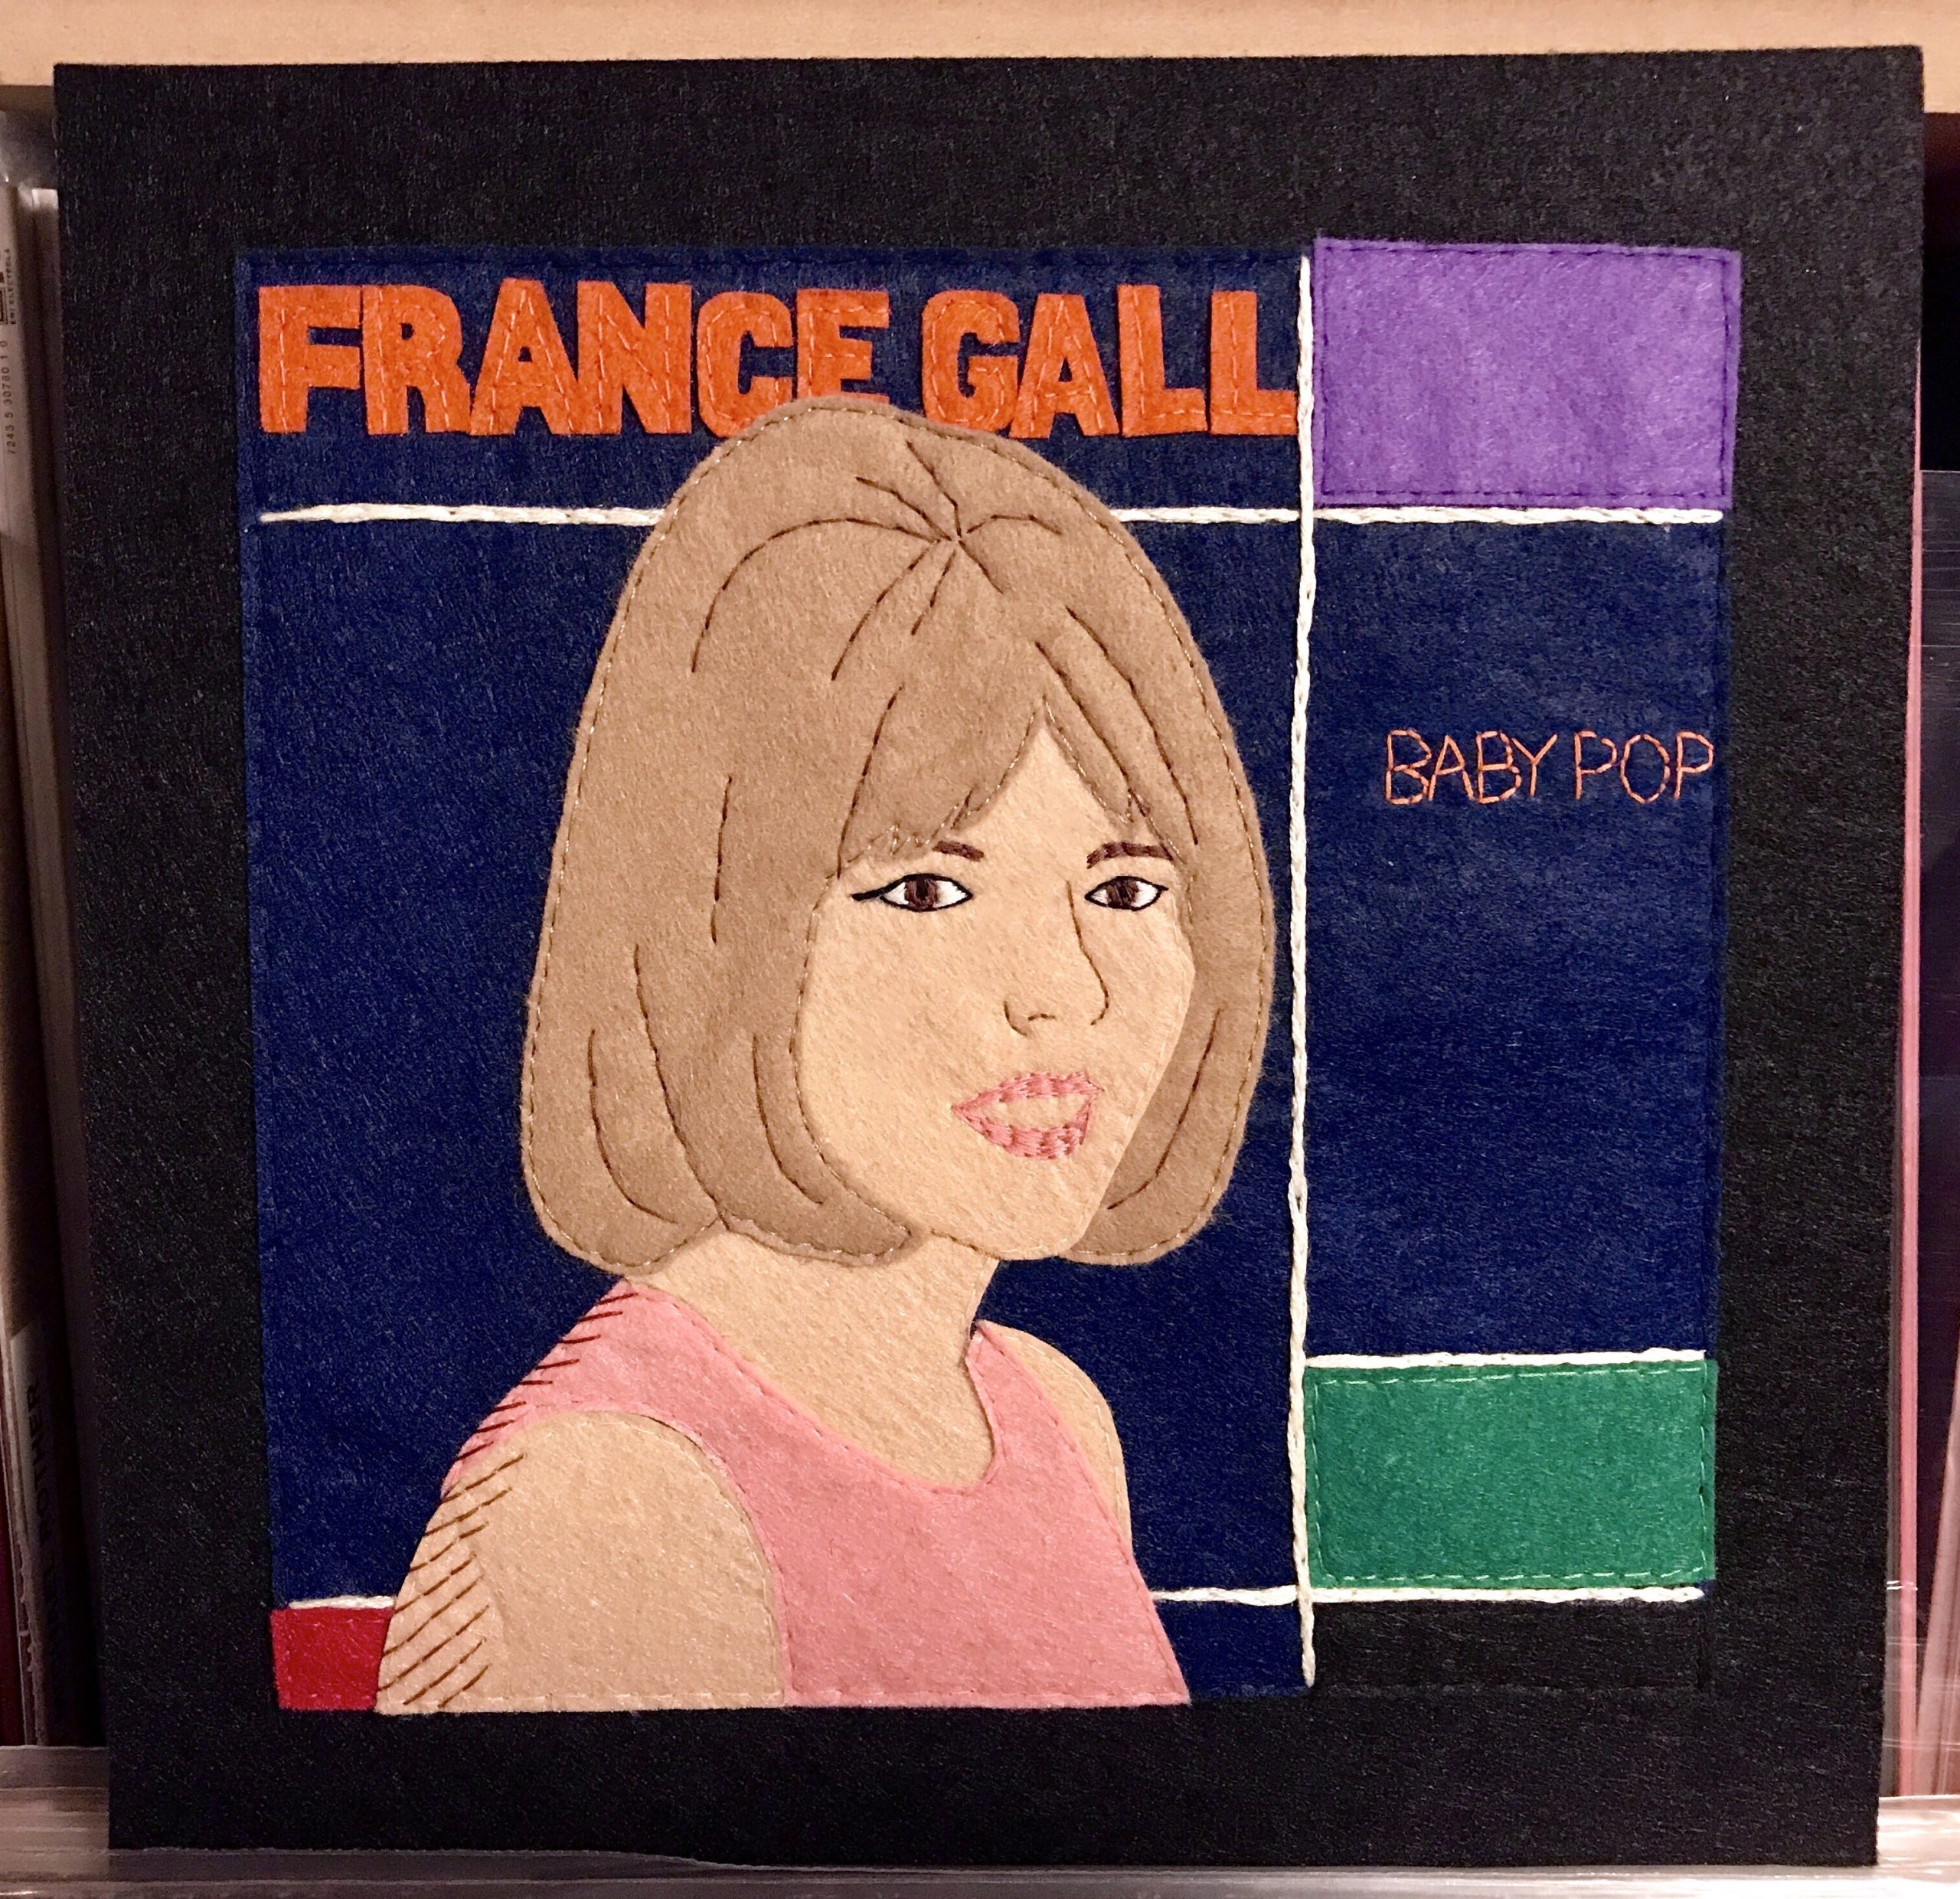 France Gall – Baby Pop (1966)